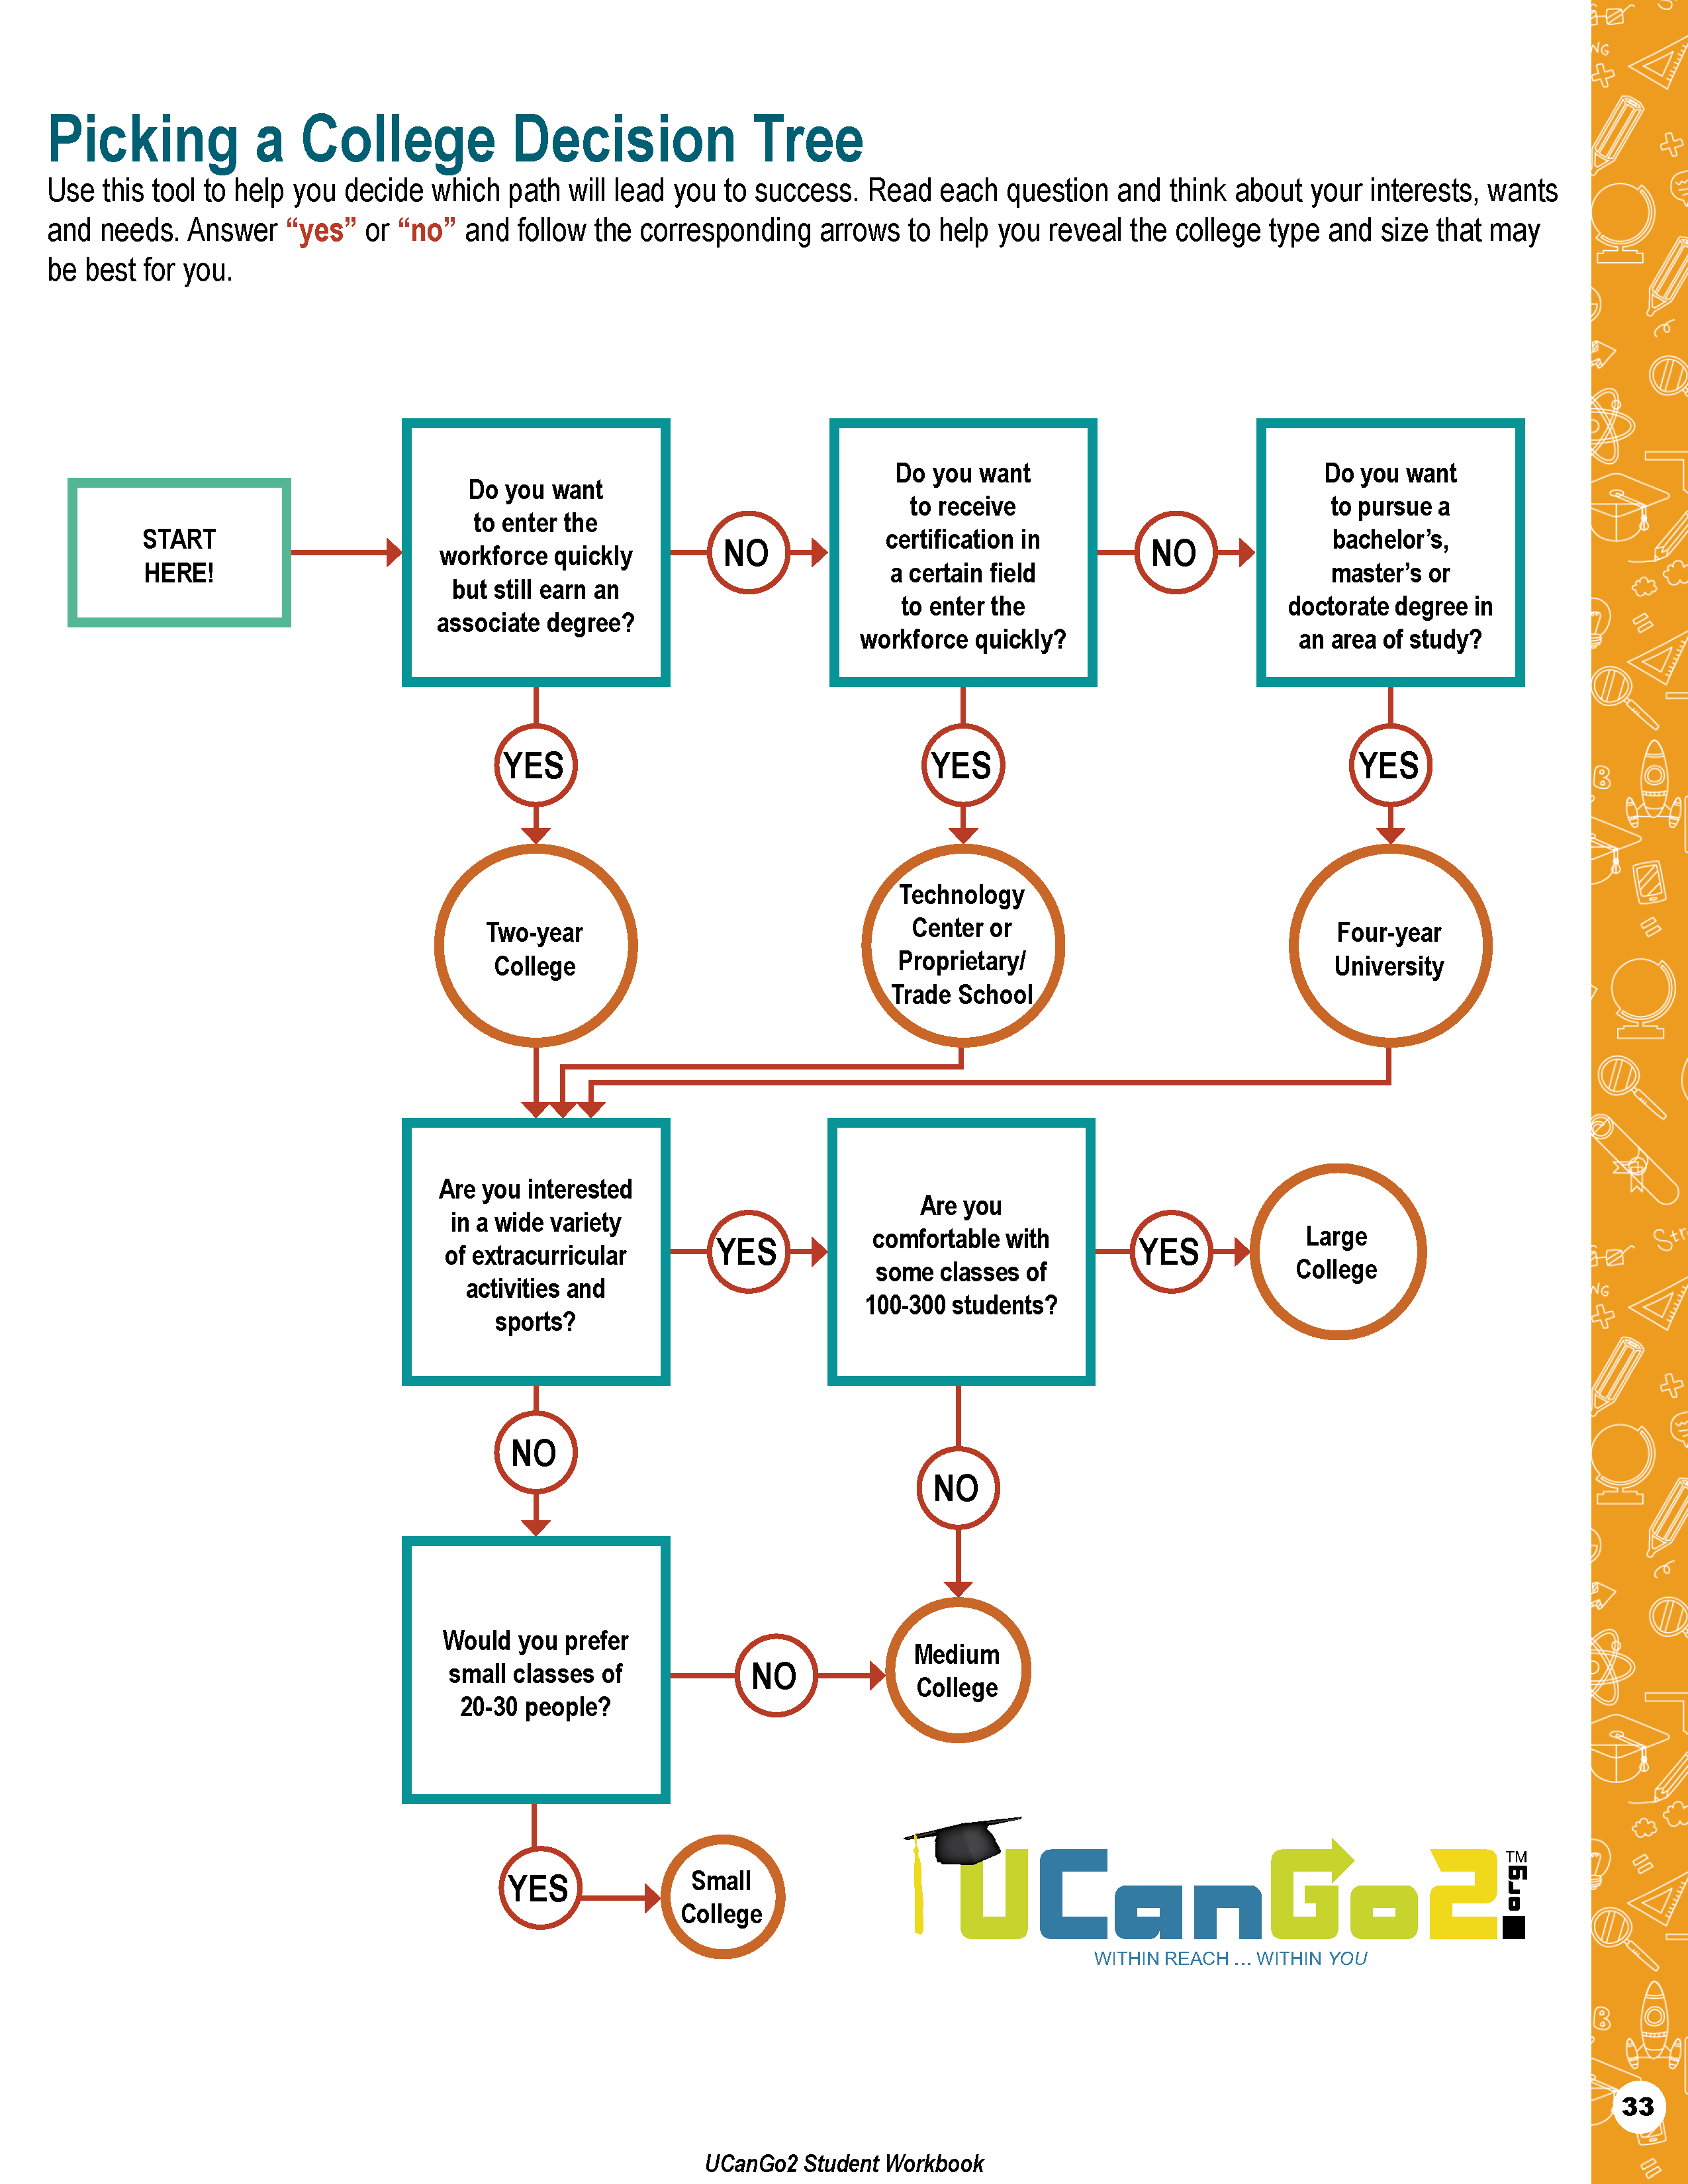 PDF of Picking a College Decision Tree opens in a new tab